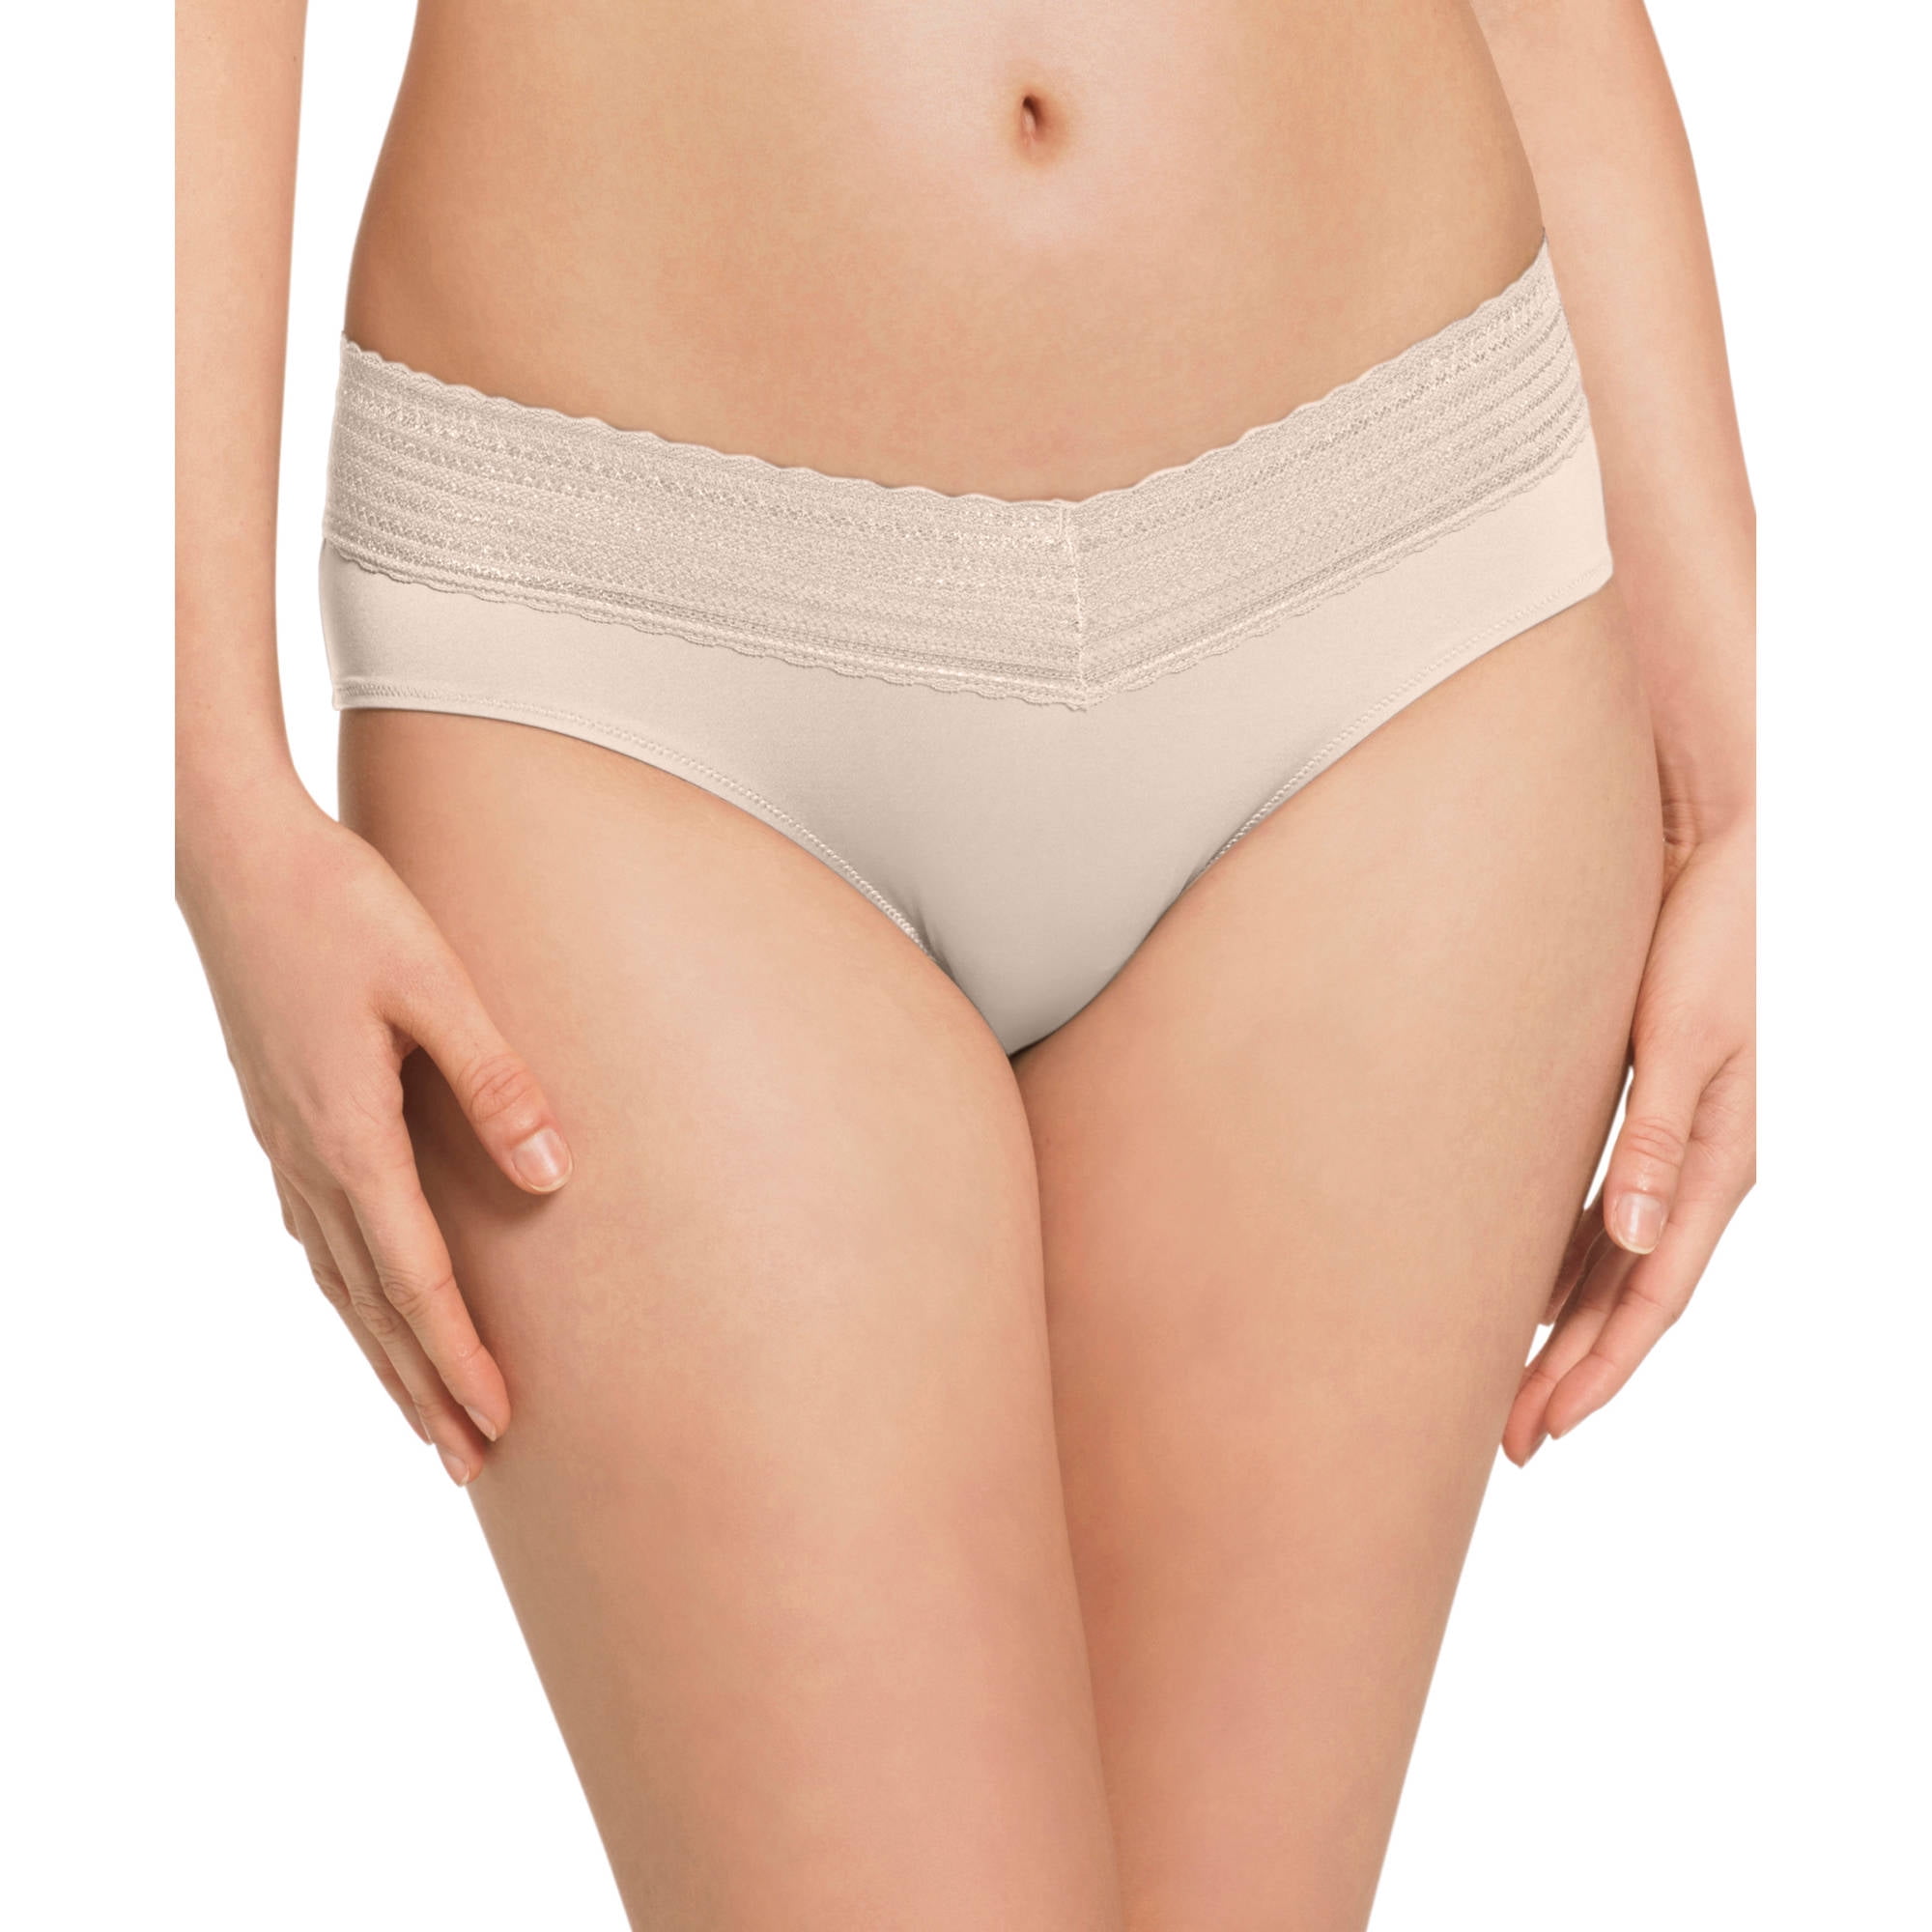 Blissful Benefits by Warner's Women's No Muffin Top w/ Lace